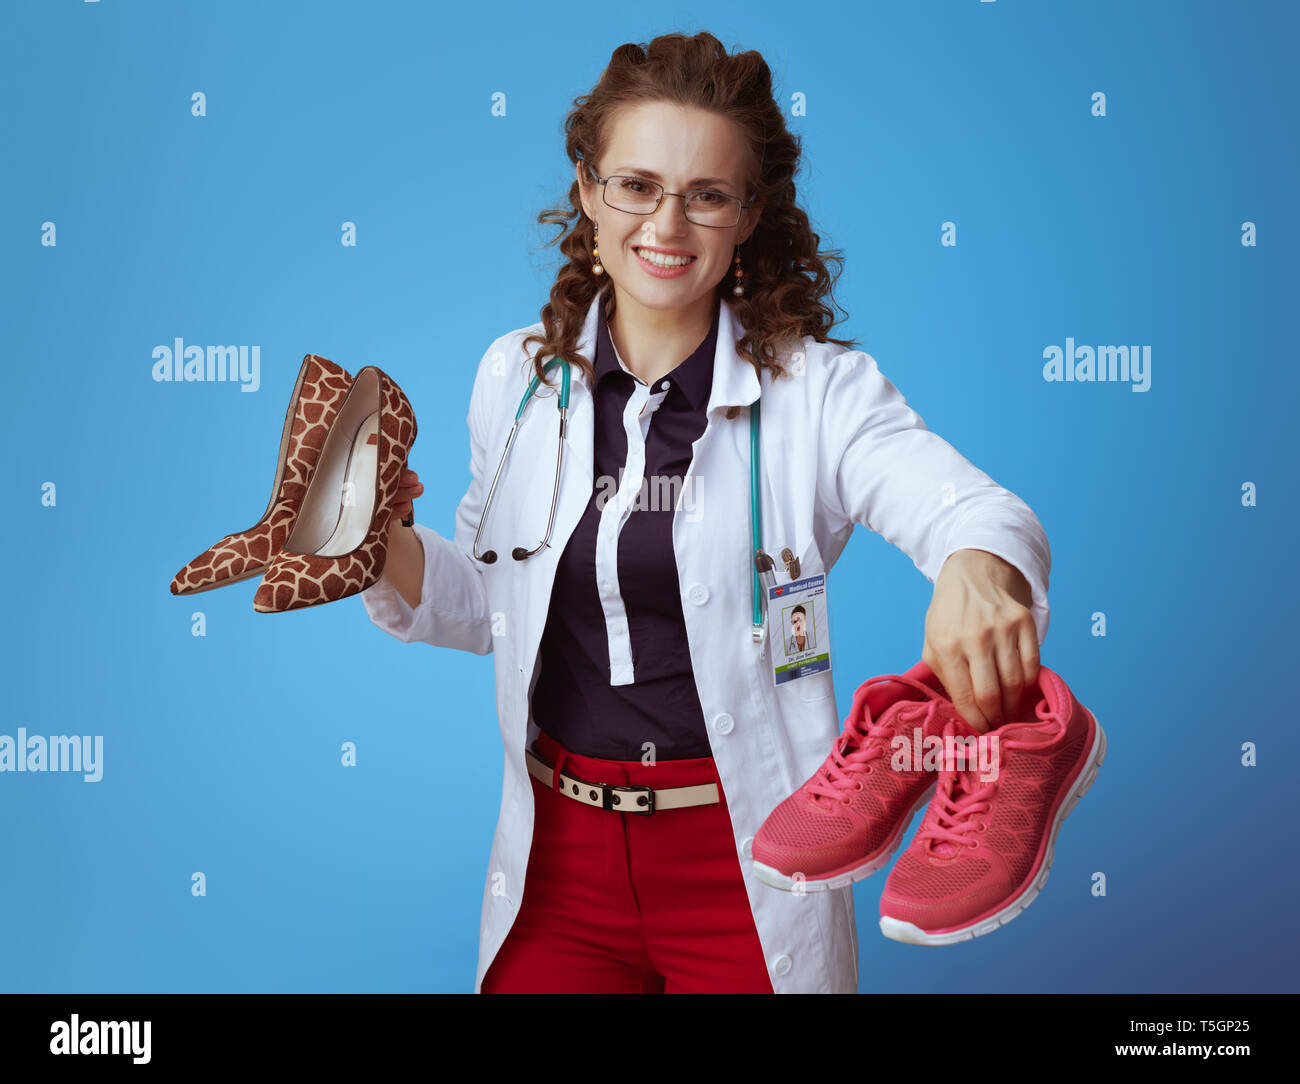 happy elegant physician woman in bue shirt, red pants and white medical robe giving fitness sneakers while holding high heel shoes in other hand isola Stock Photo